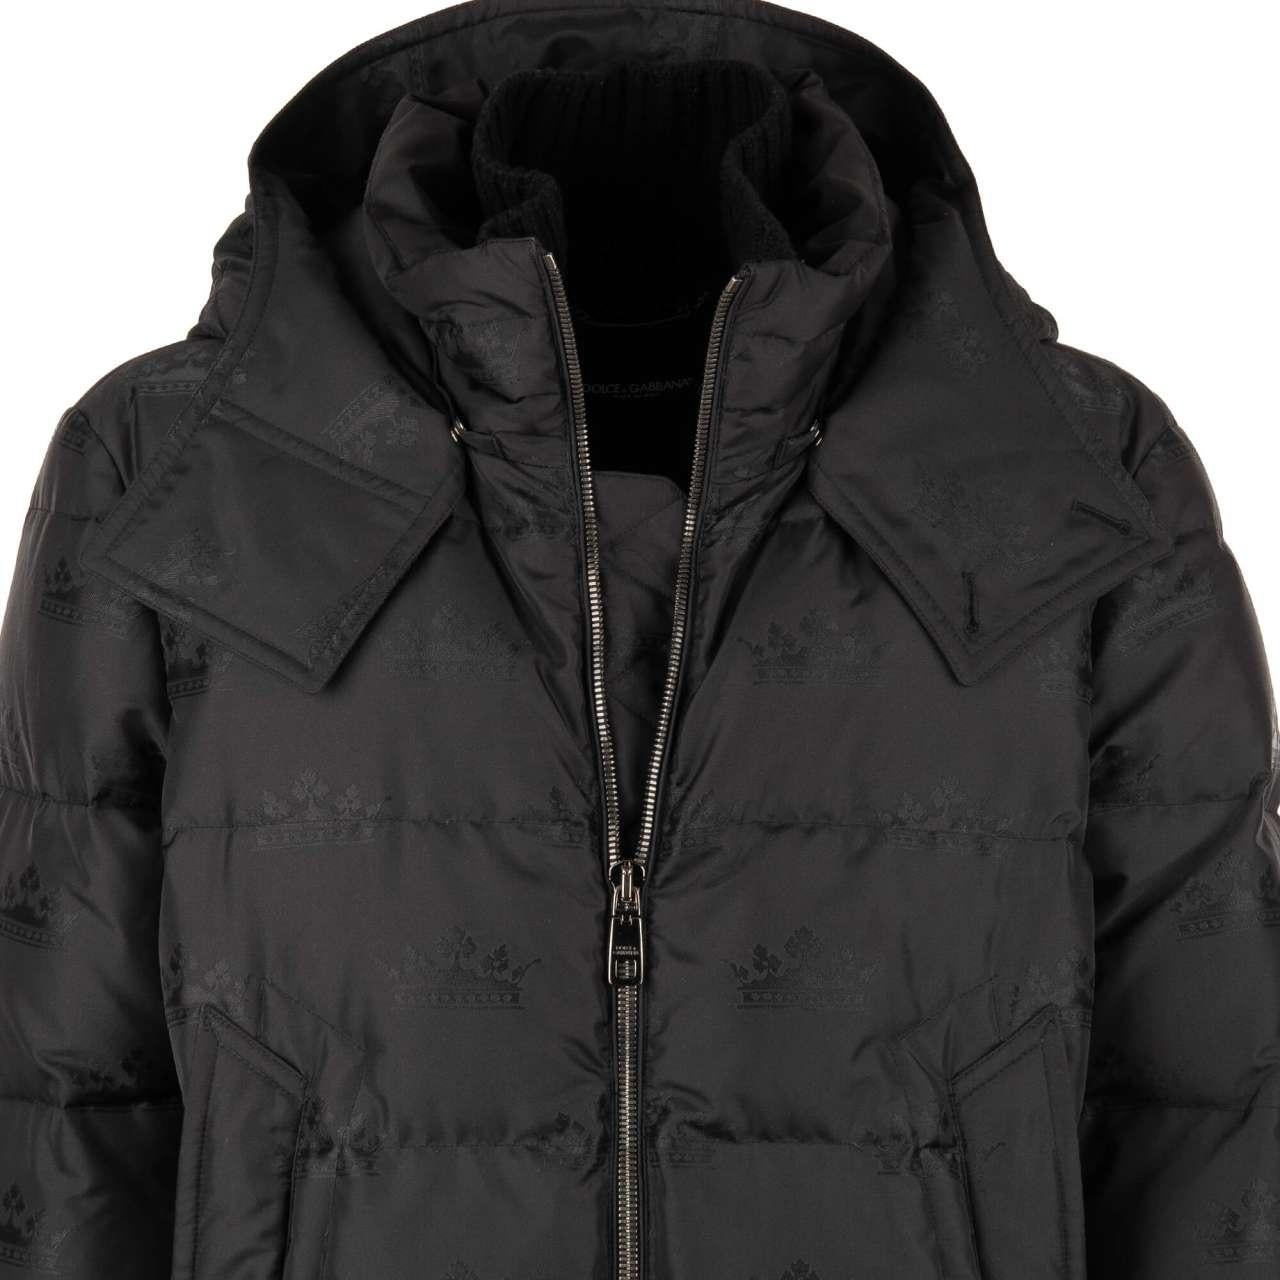 D&G Crowns Textured Hooded Down Jacket with Knit Details Black 50 M-L For Sale 2